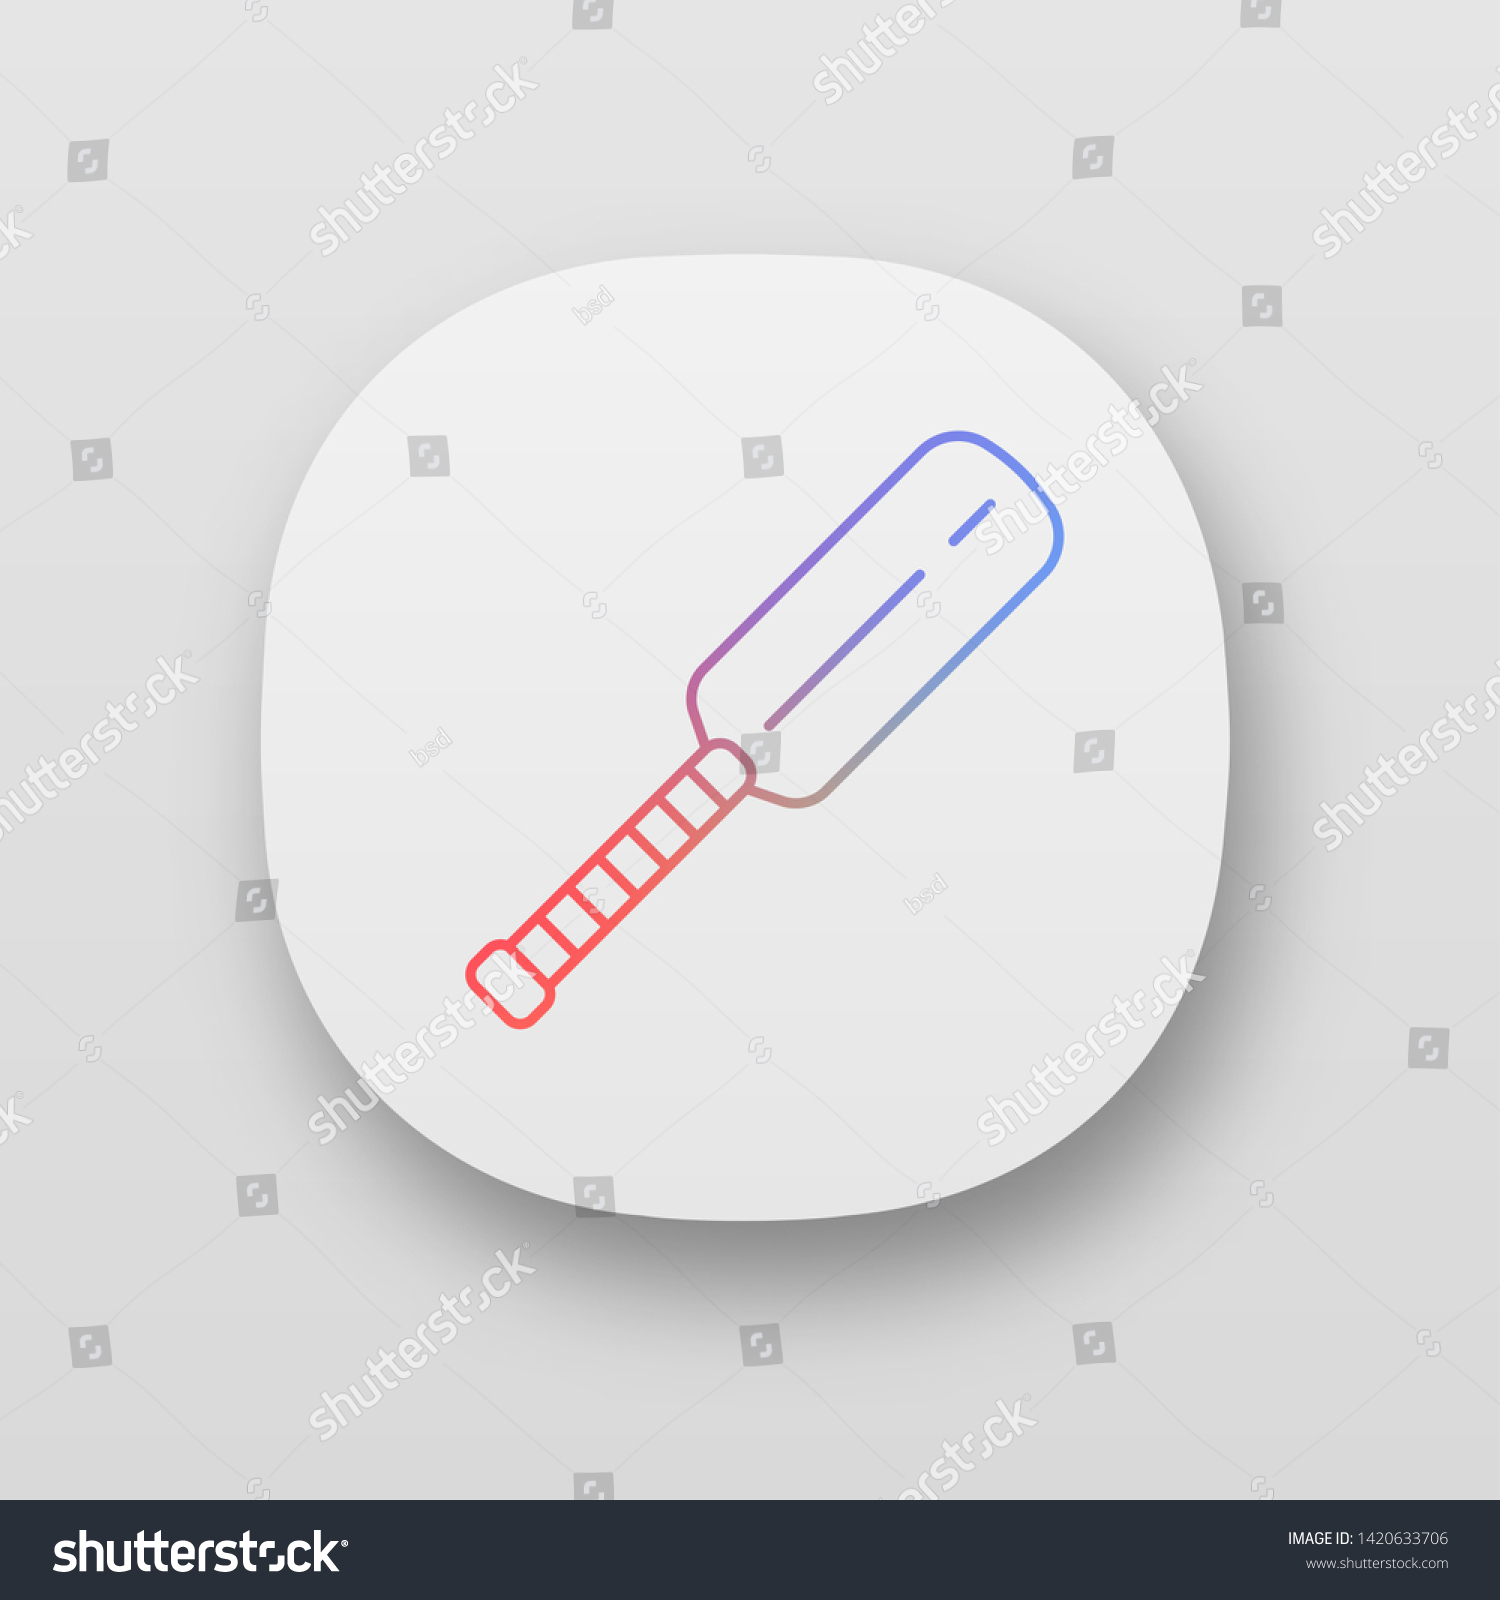 SVG of Cricket bat app icon. Equipment for batsmen. Wooden flat block with long handle. Professional sports accessory. UI/UX user interface. Web or mobile applications. Vector isolated illustrations svg